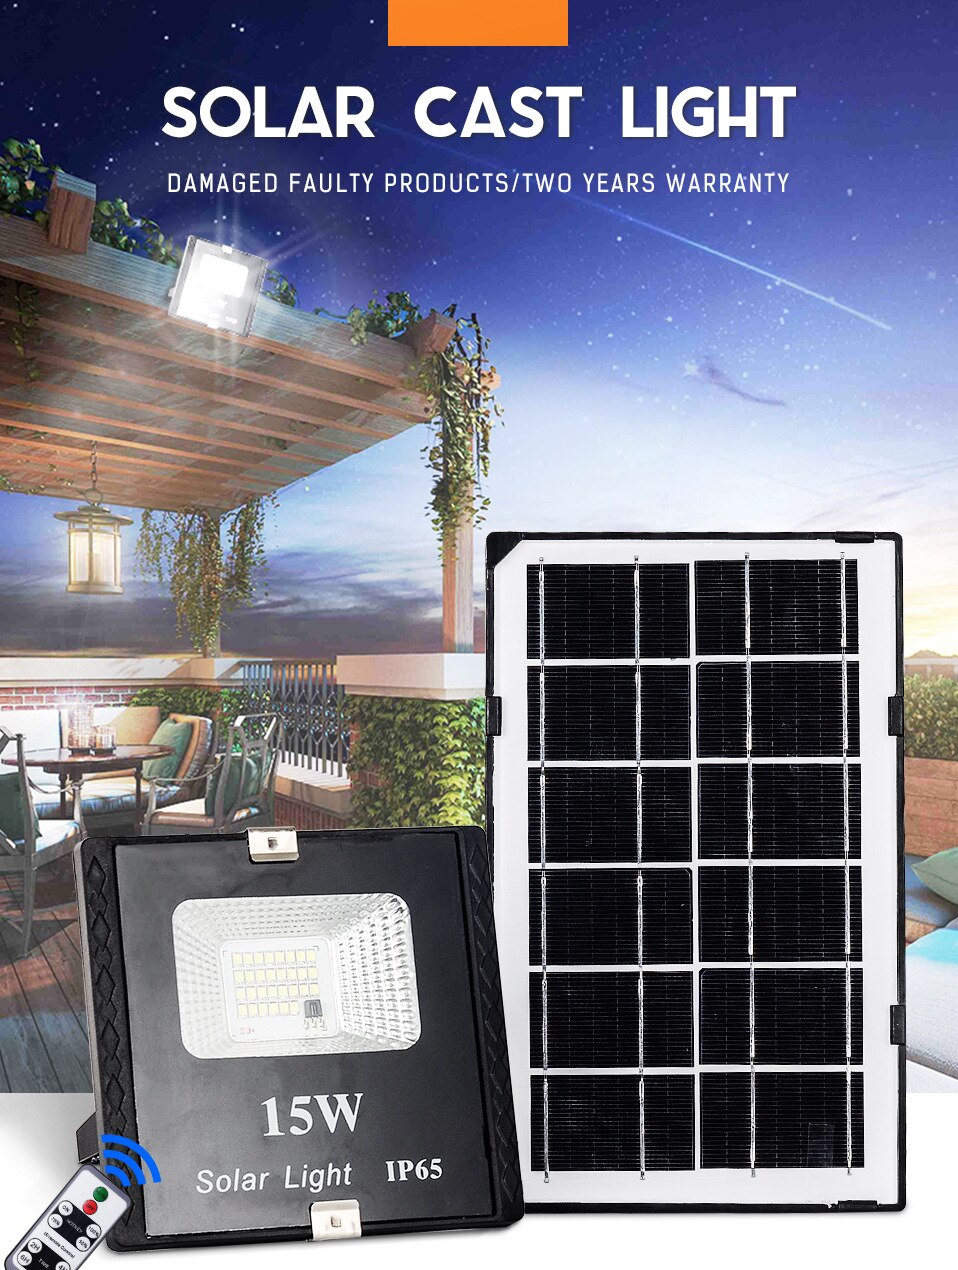 30 led solar lights for outdoor garden wall yard safety LED lighting, adjustable lighting angle IP65 With remote control